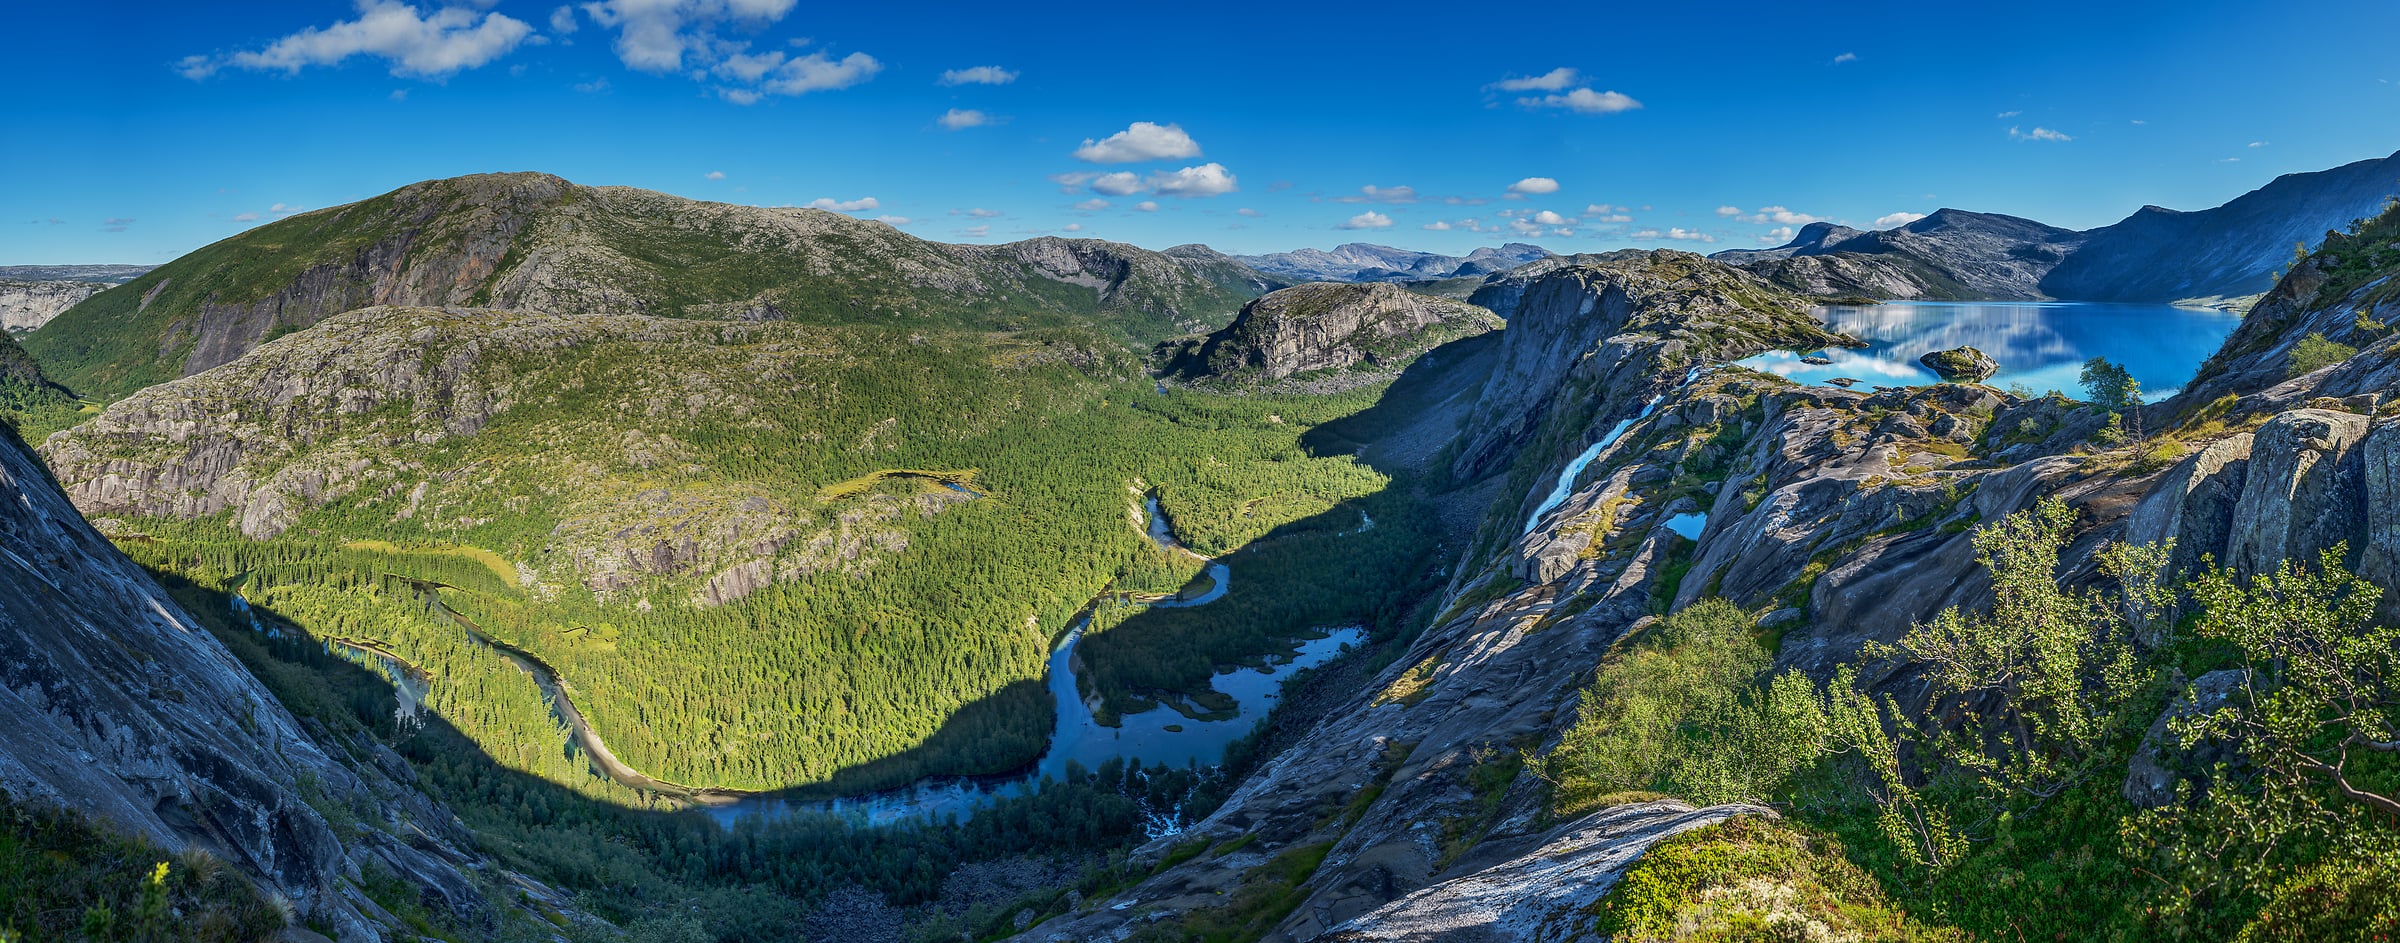 2,172 megapixels! A very high resolution, large-format VAST photo print of a landscape in Norway with lakes, rivers, and mountains; landscape photograph created by Alfred Feil in Lake Litlverivassforsen, Rago National Park, Norway.